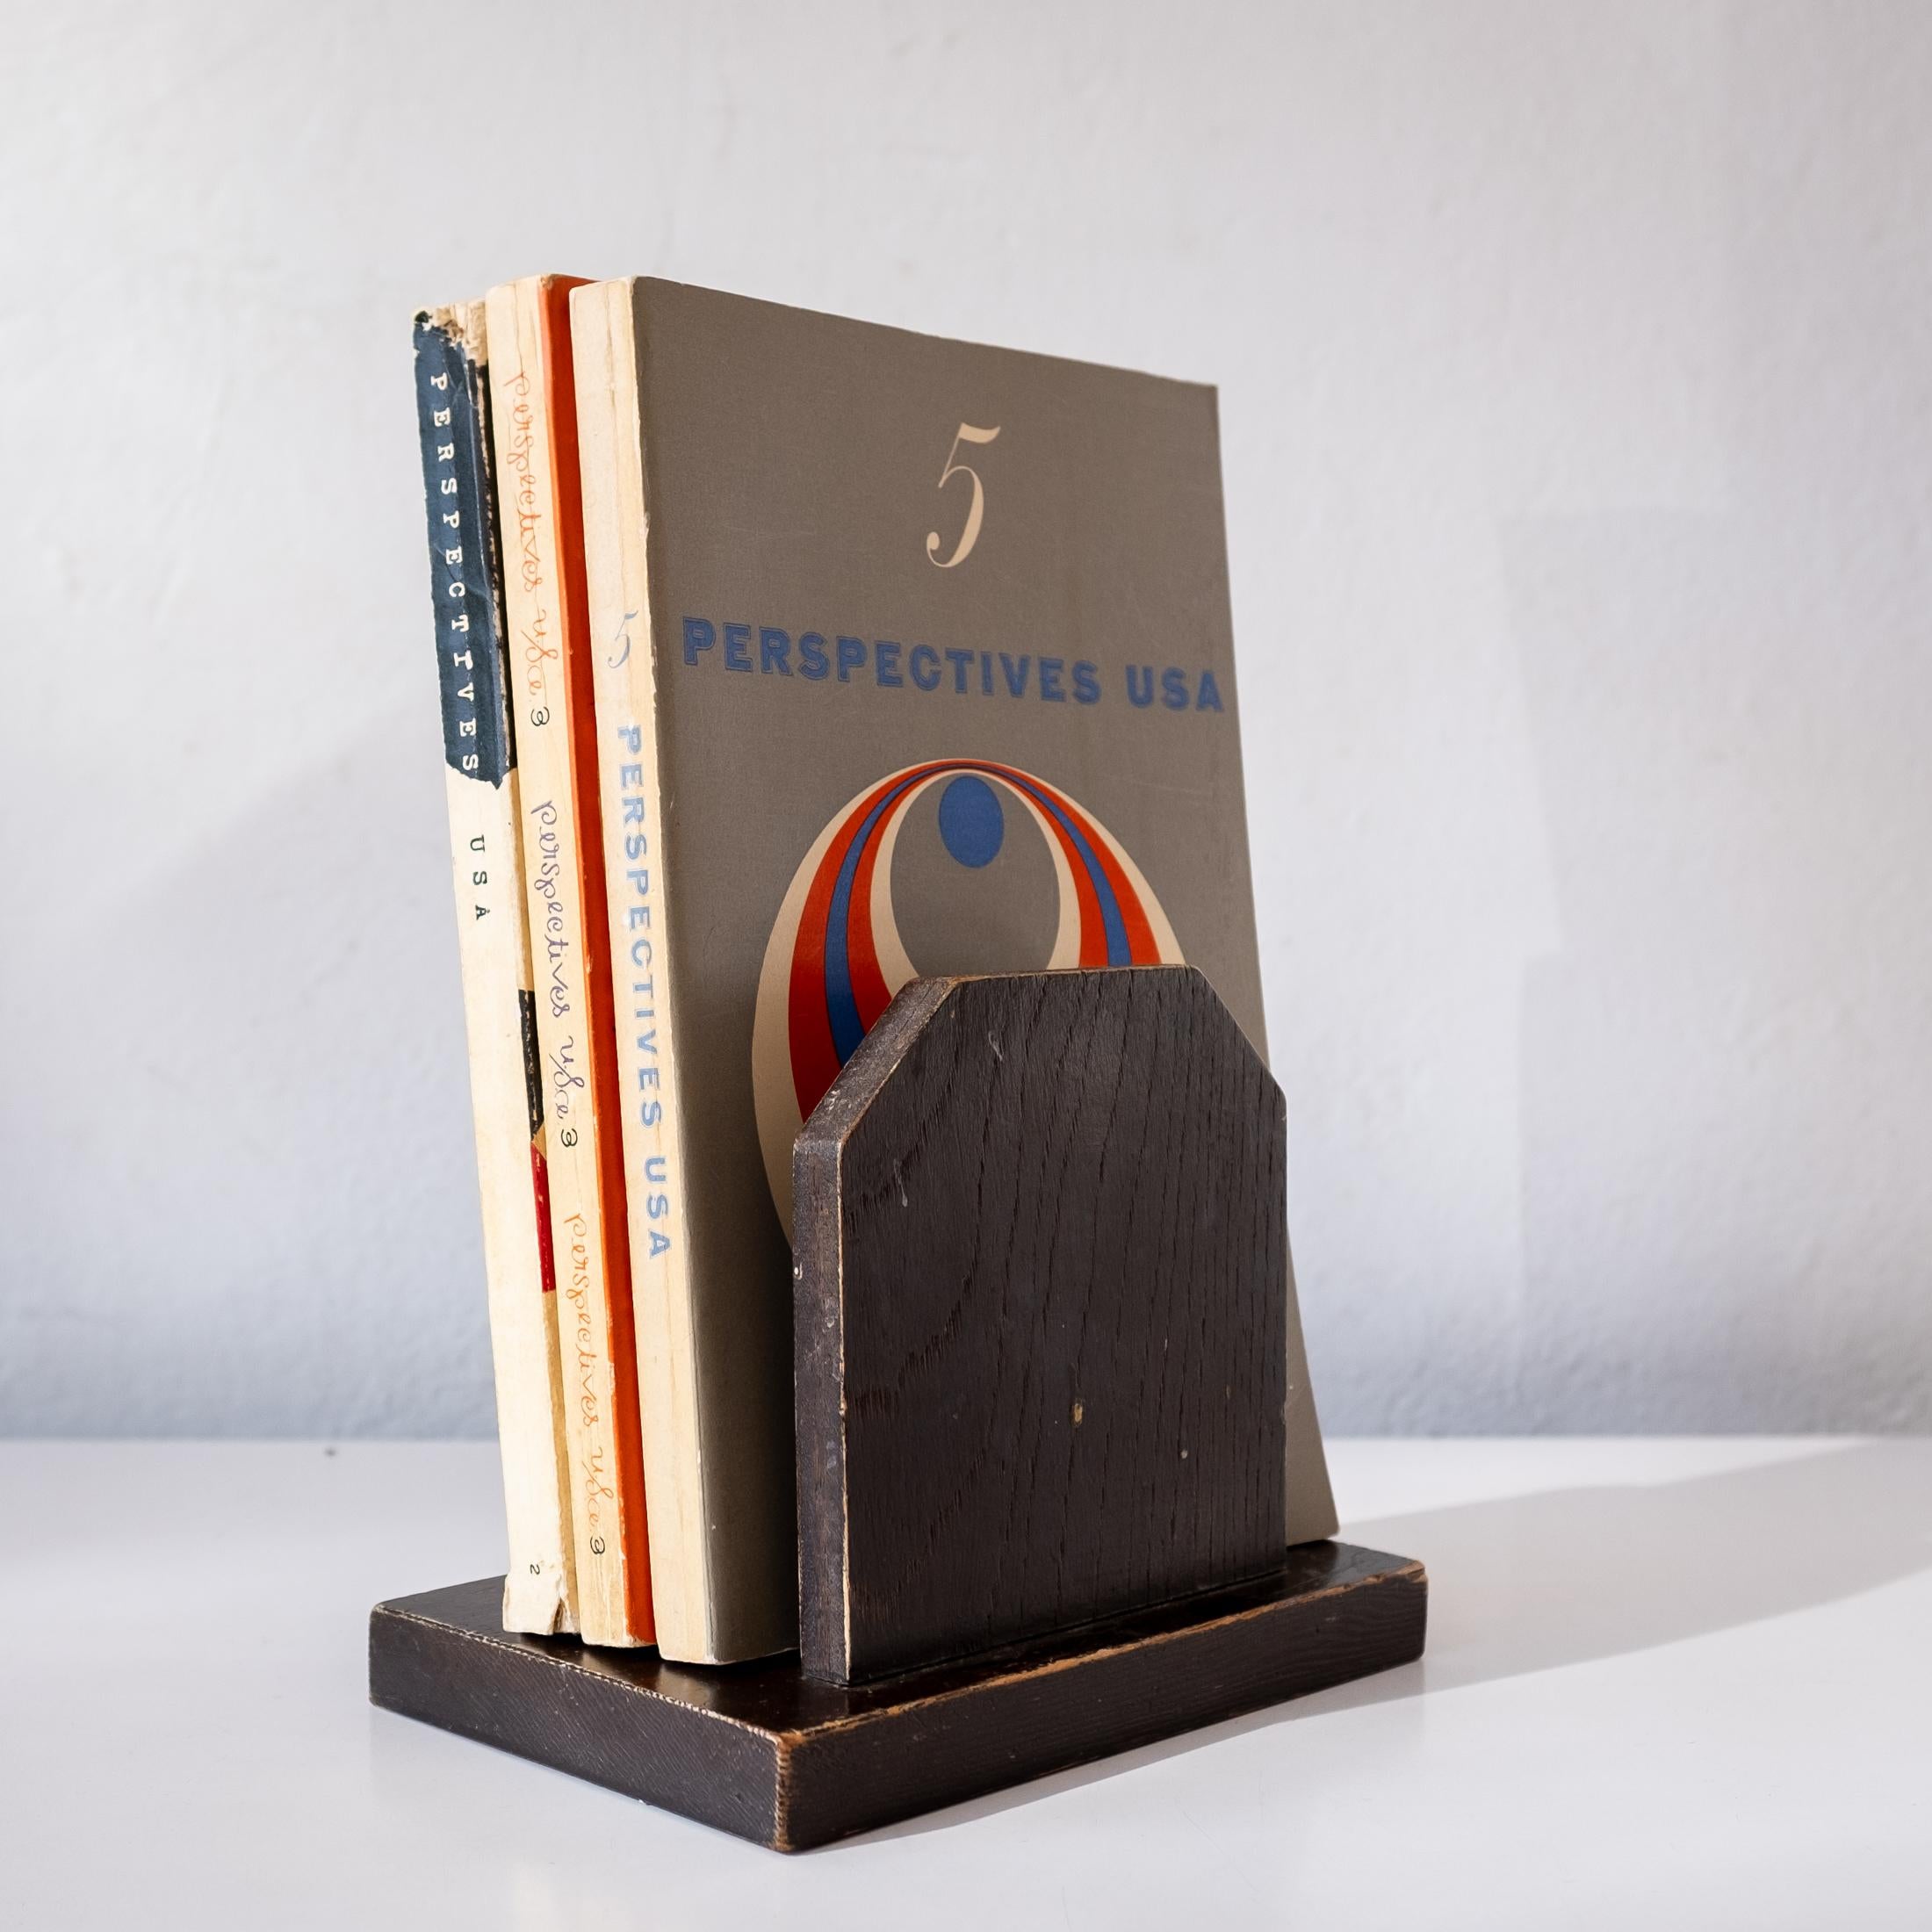 Desktop book or mail holder by John Lloyd Wright (December 12, 1892 – December 20, 1972). This was part of the many furnishings designed by John Lloyd Wright’s House for Mr. Yager Cantwell (1962-63) in Rancho Santa Fe. 

John Lloyd Wright was an